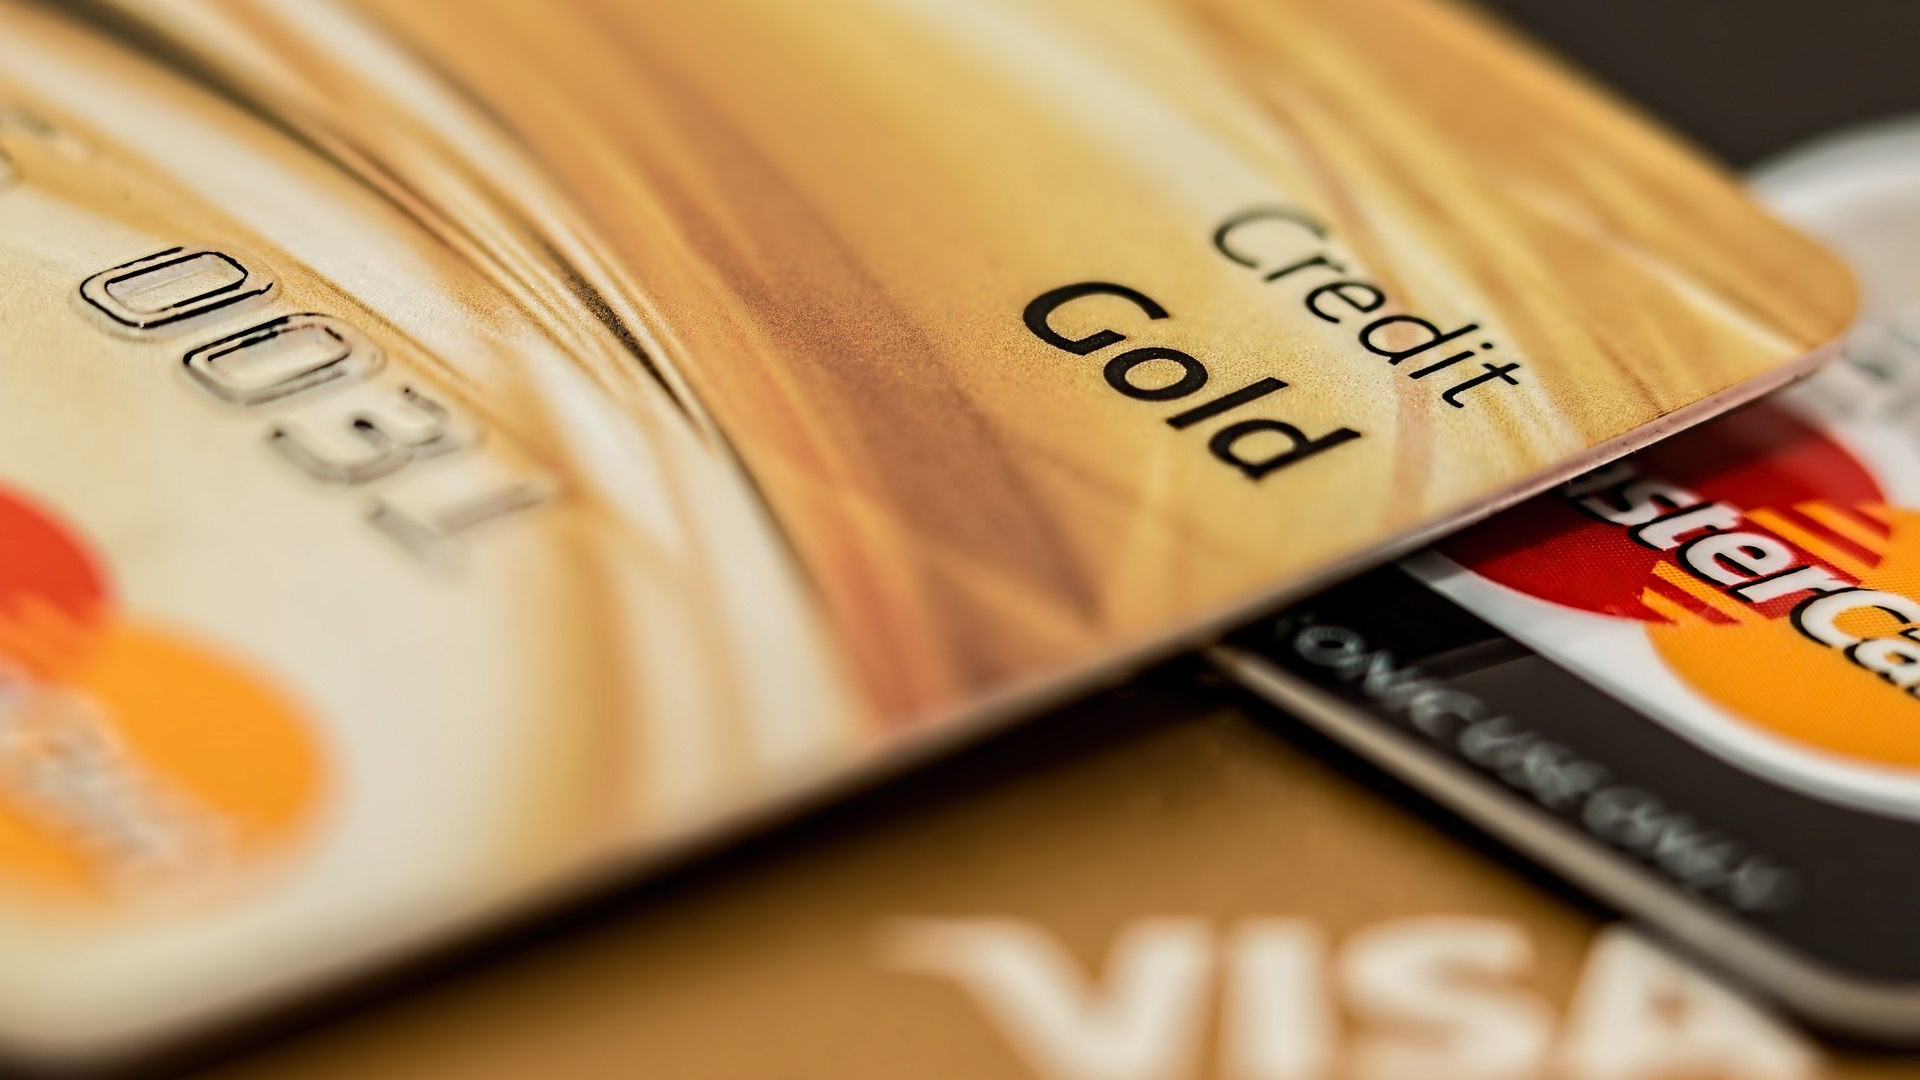 Mastercard: The world's two largest payment card network processors, Visa, Credit card. 1920x1080 Full HD Wallpaper.